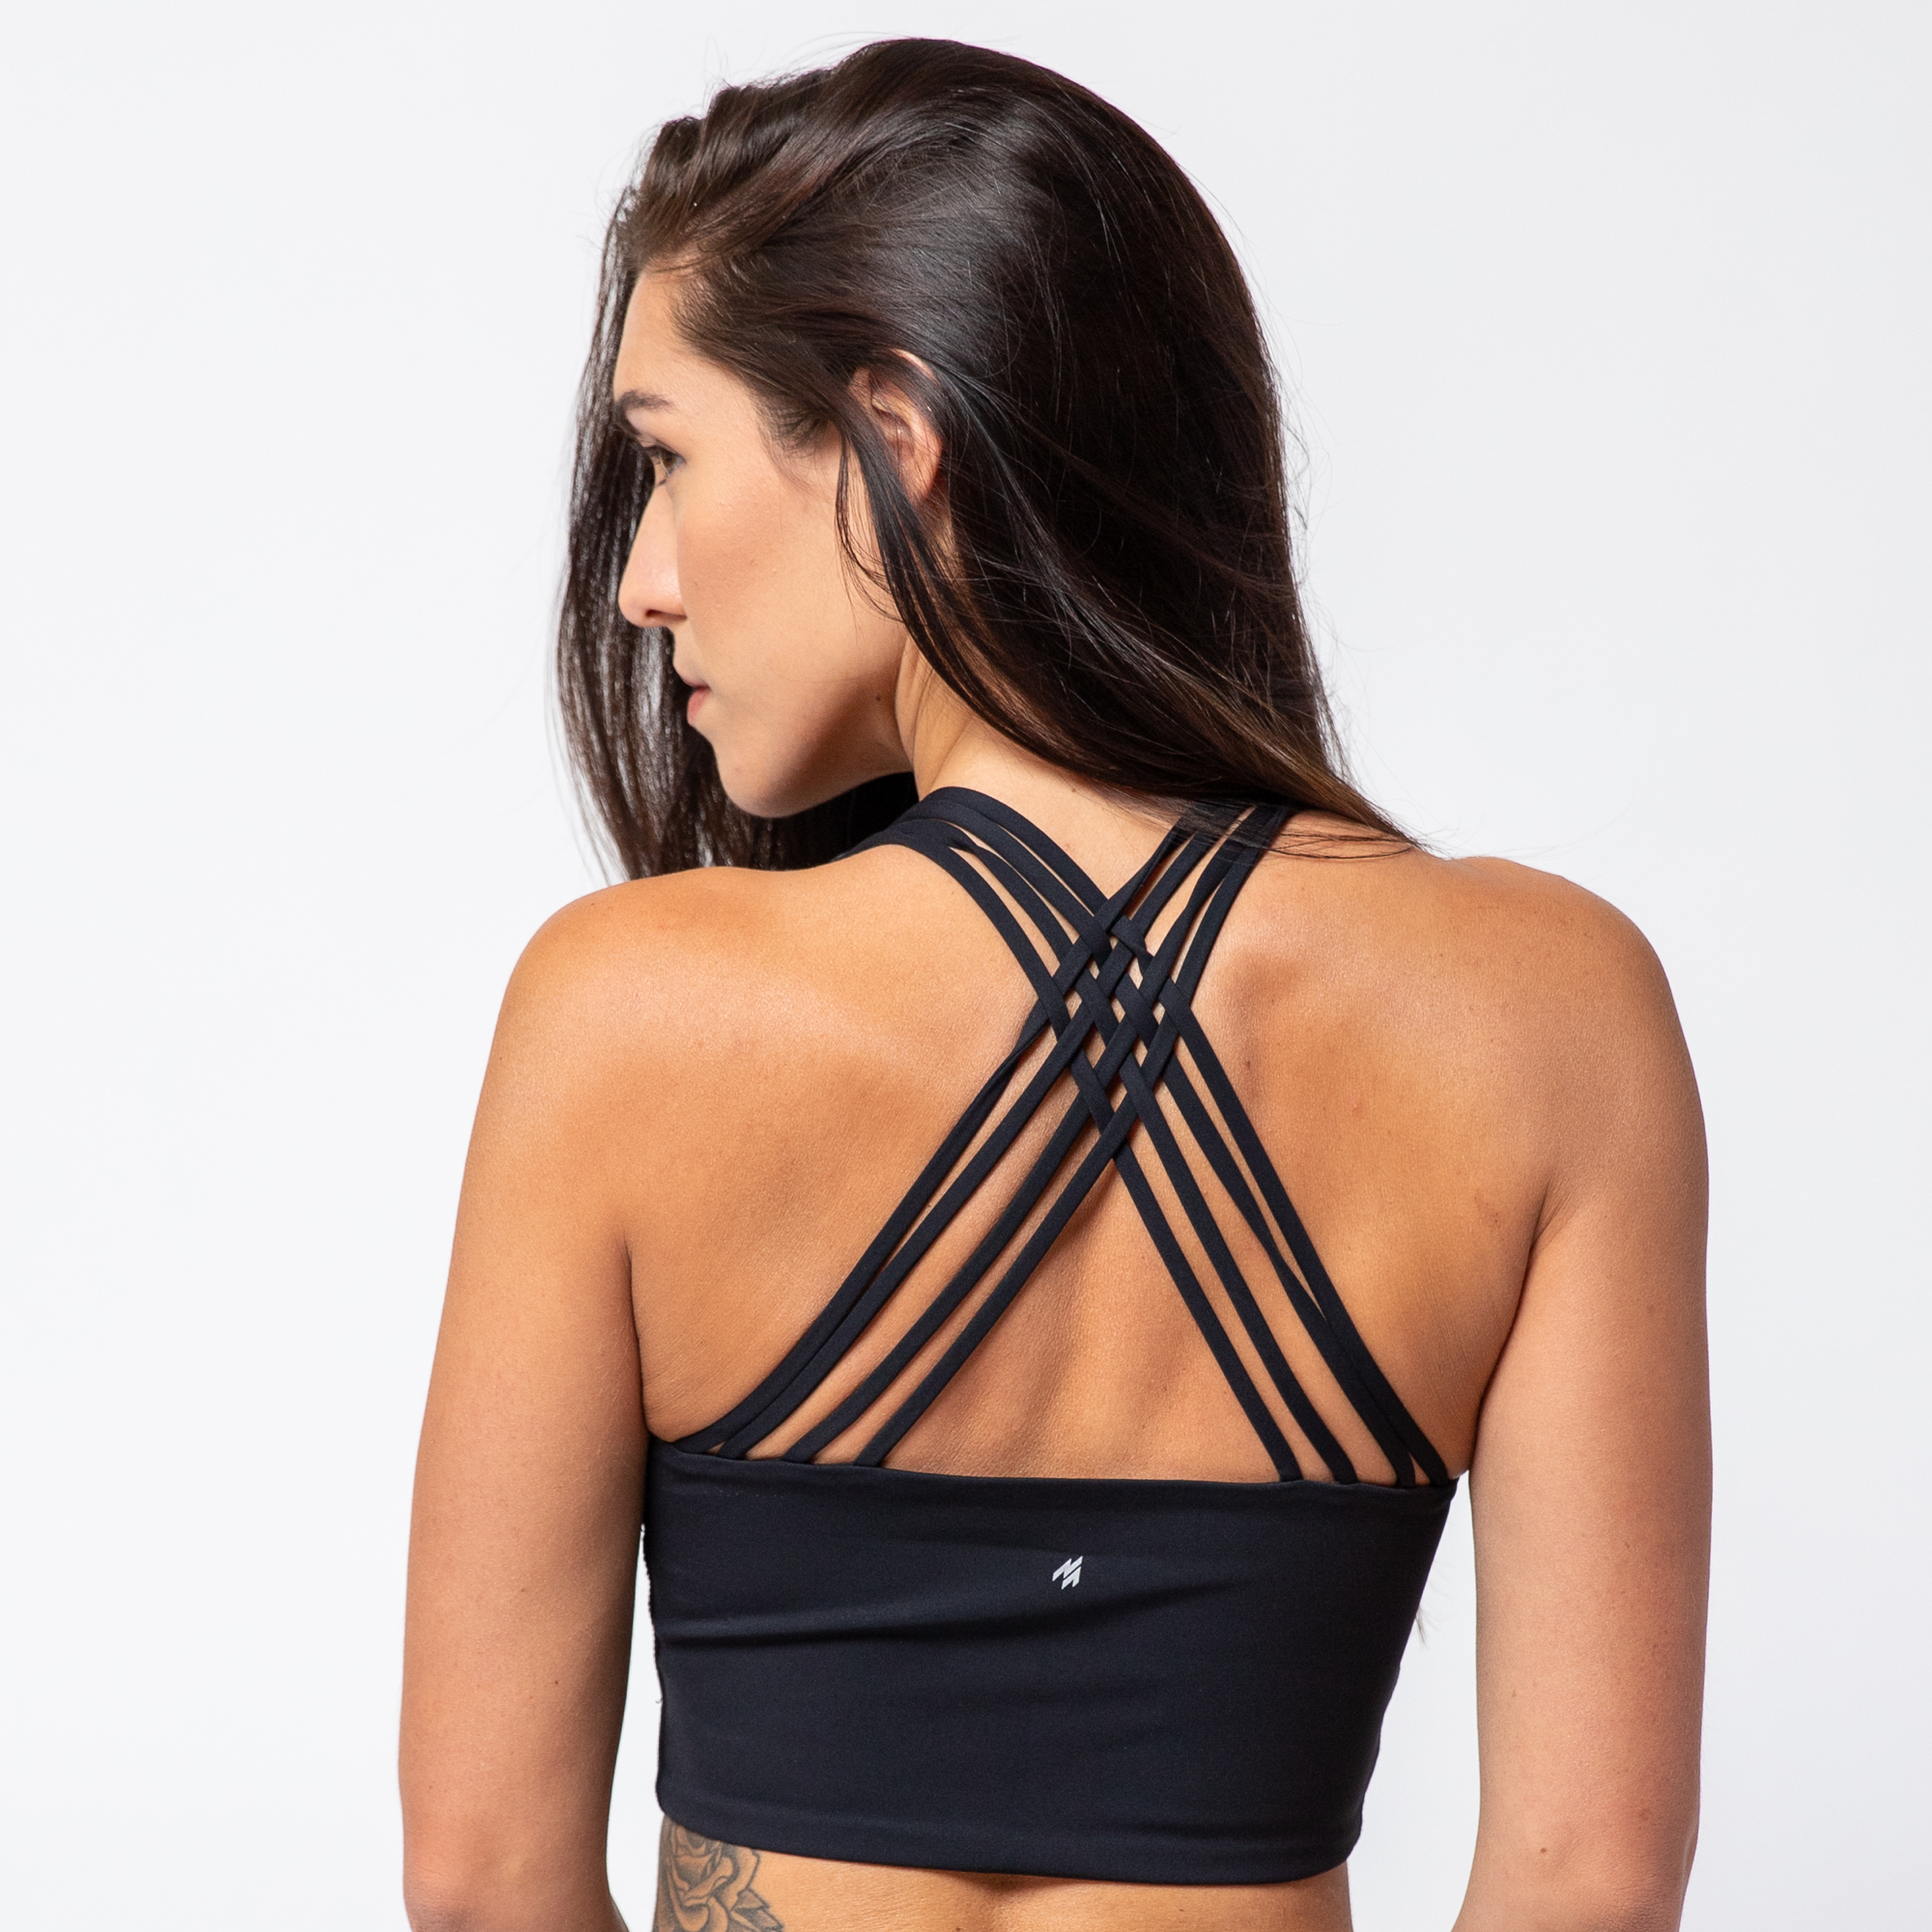 Cross Back Sport Bras: Combining Style and Comfort for Your Active  Lifestyle, by Mirielys Perez